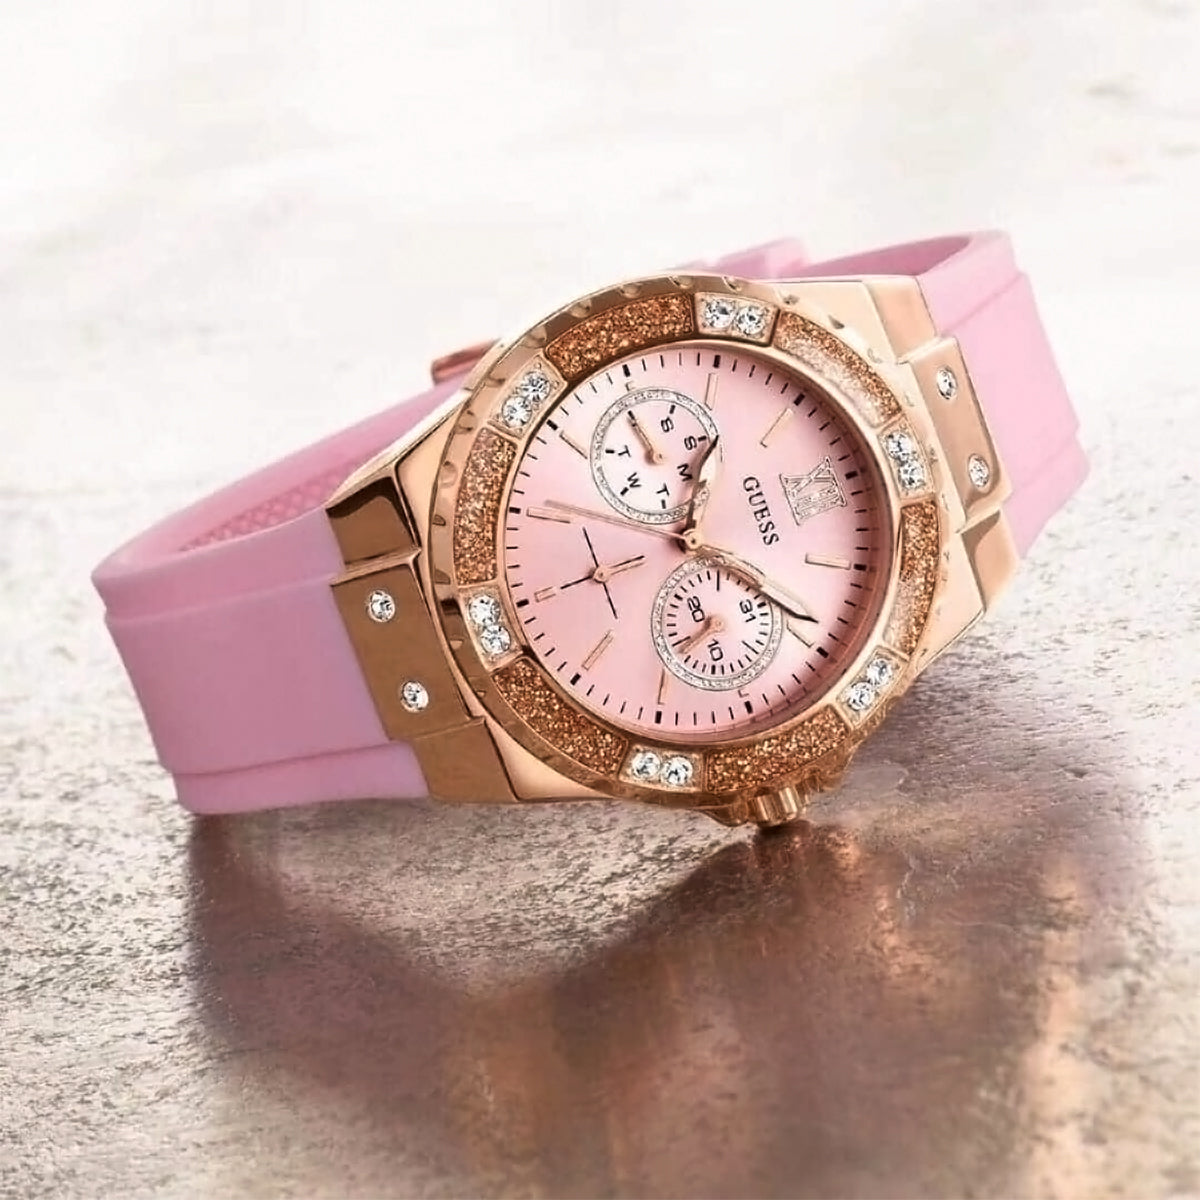 Women Limelight watch W1053L3 with pink dial rubber strap